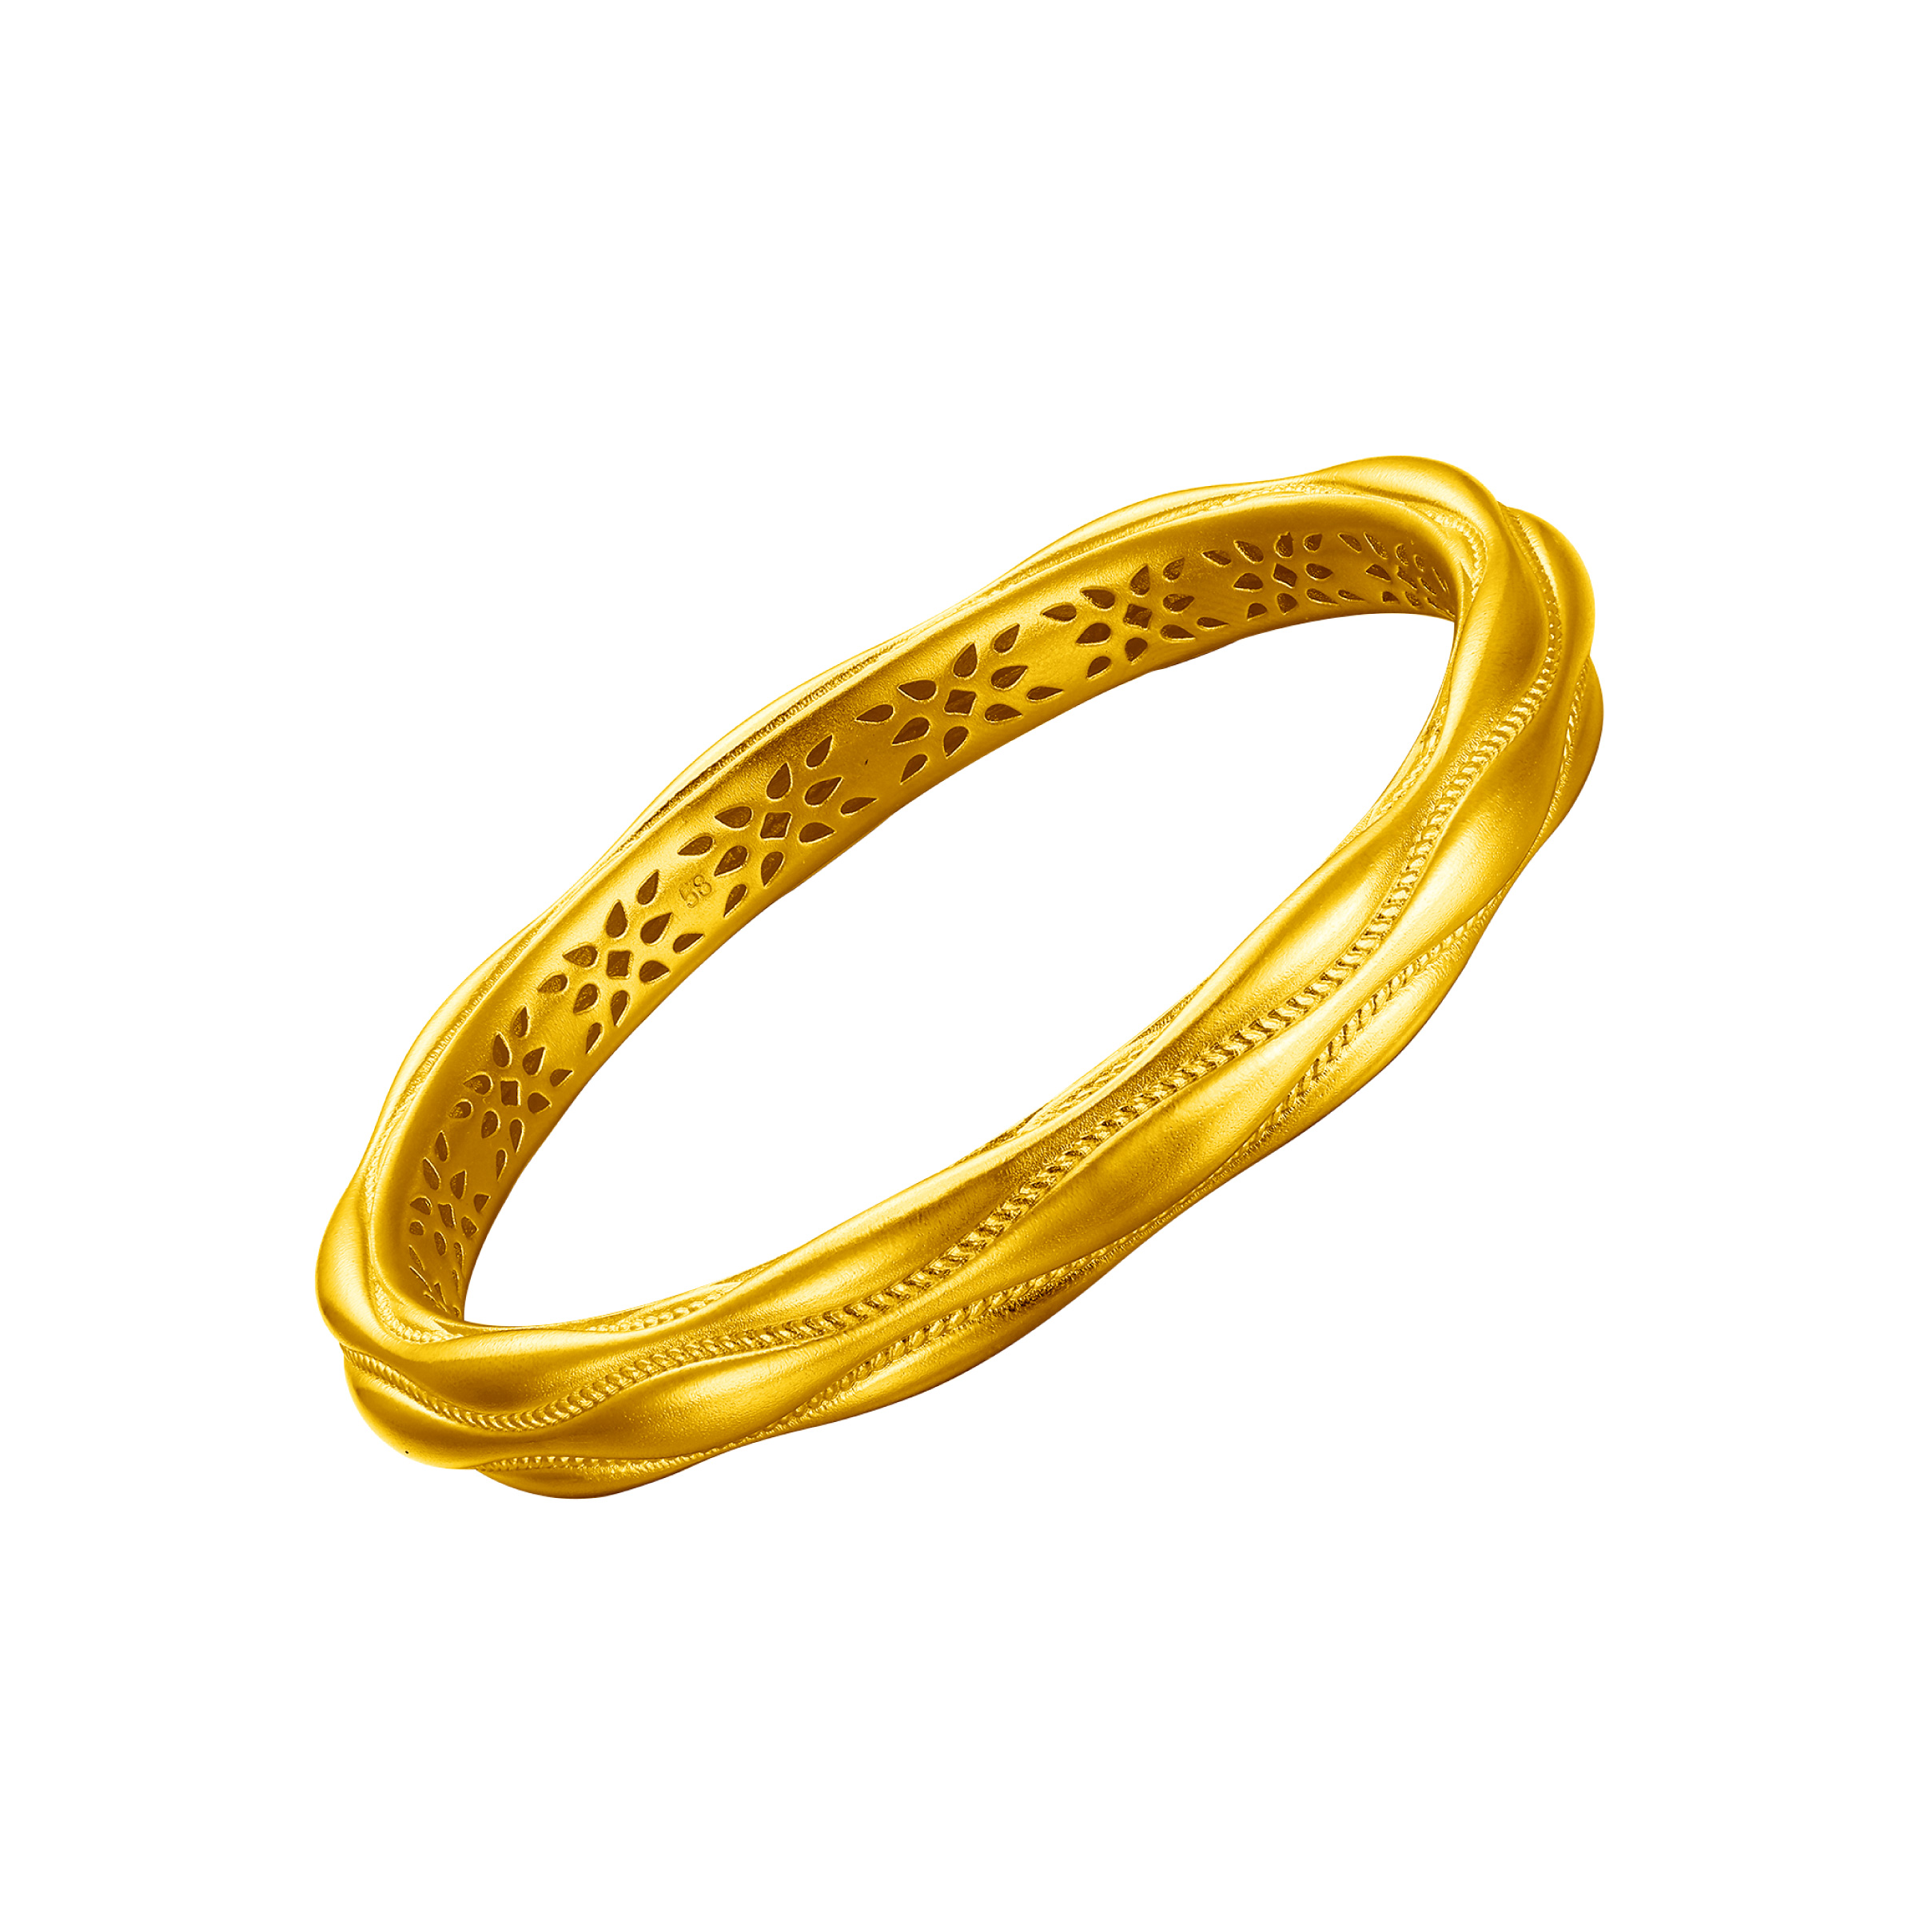 Antique Gold "Health and Happiness" Gold Bangle